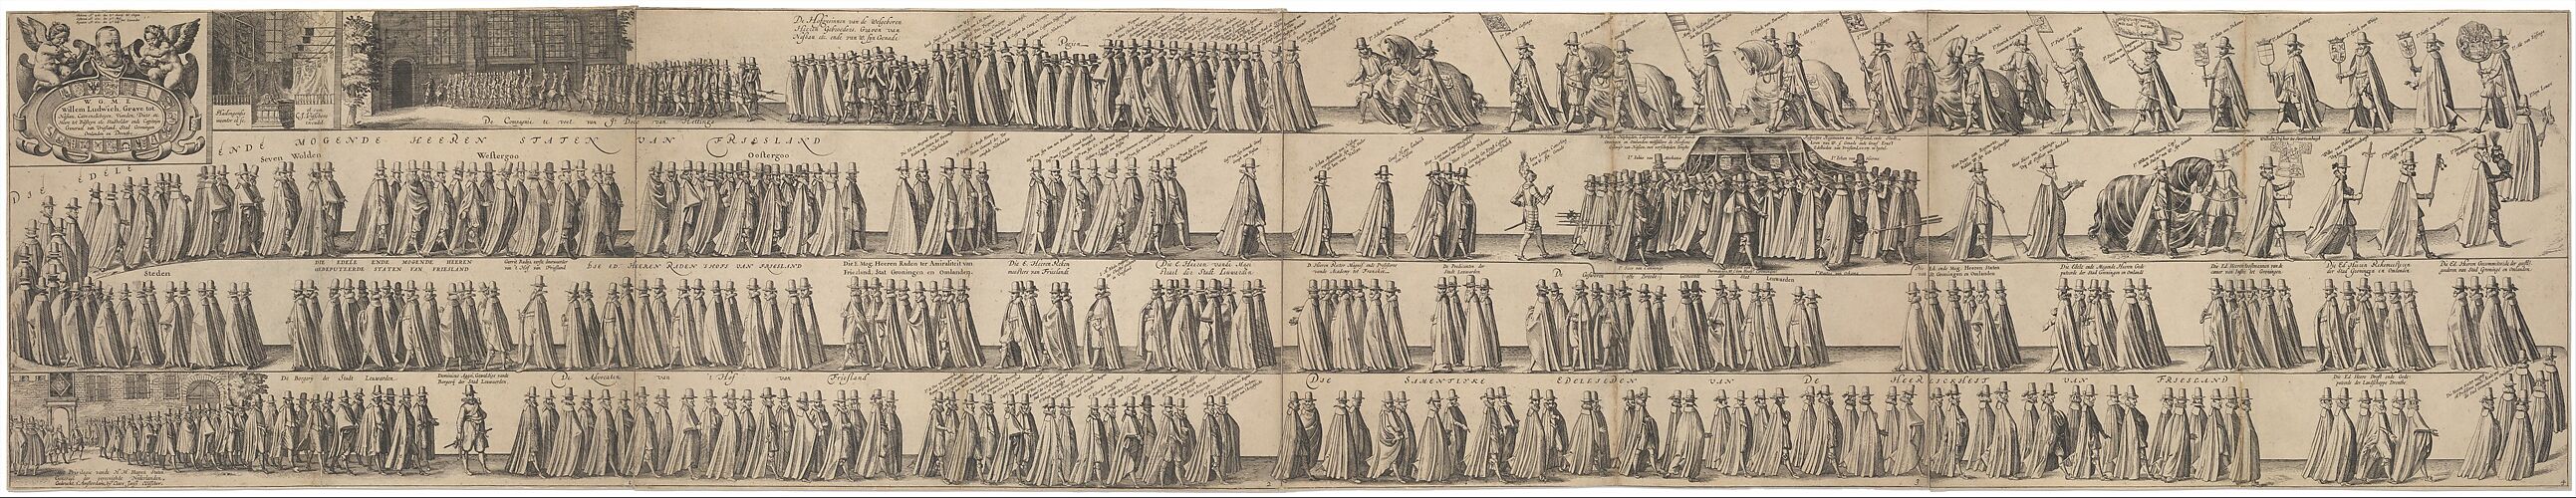 Funeral Procession of William Lodewijk count of Nassau, July 13, 1620 in Leeuwarden